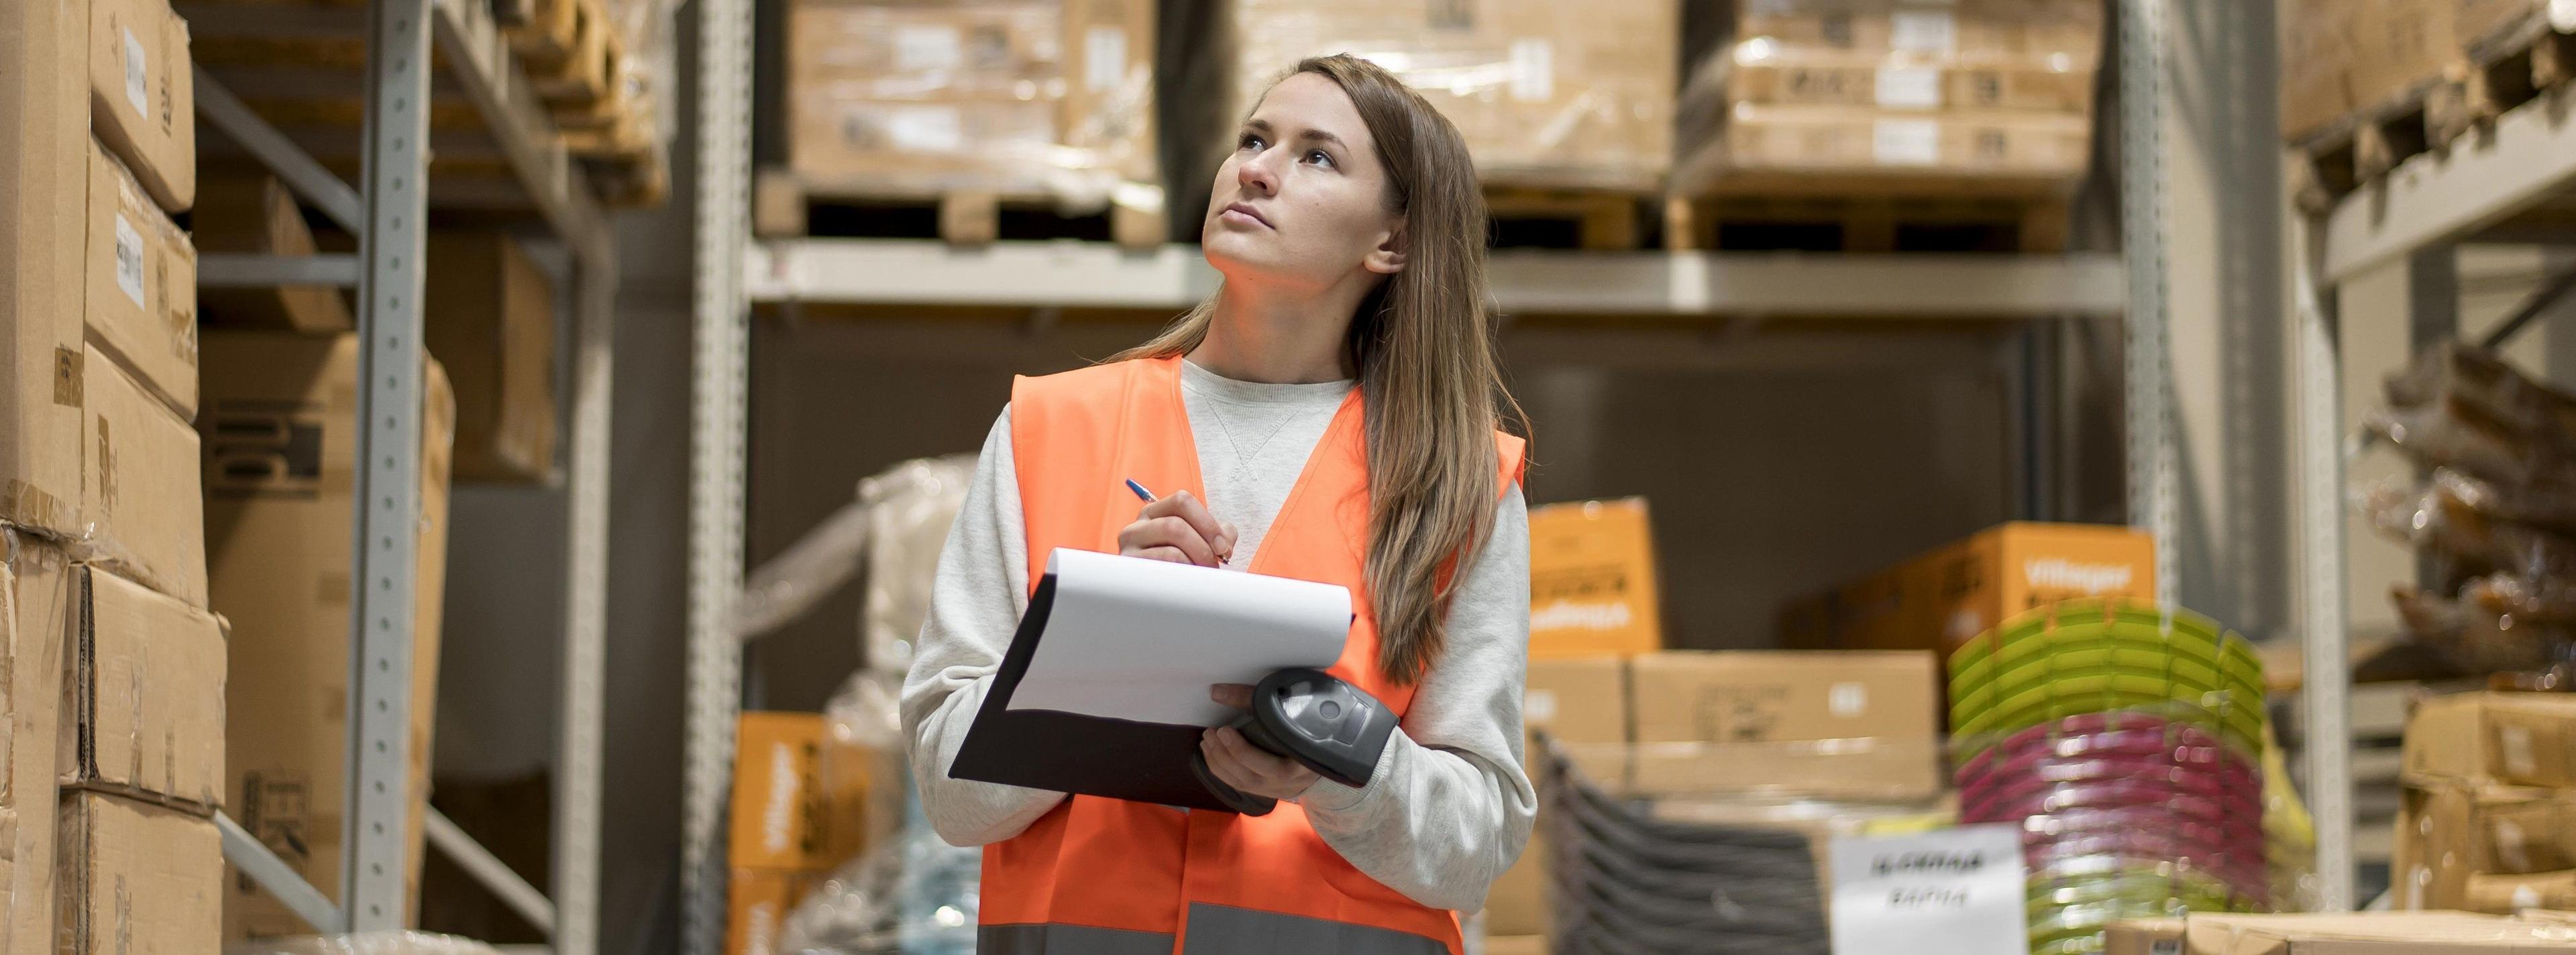 E-Commerce inventory management: what you need to know about